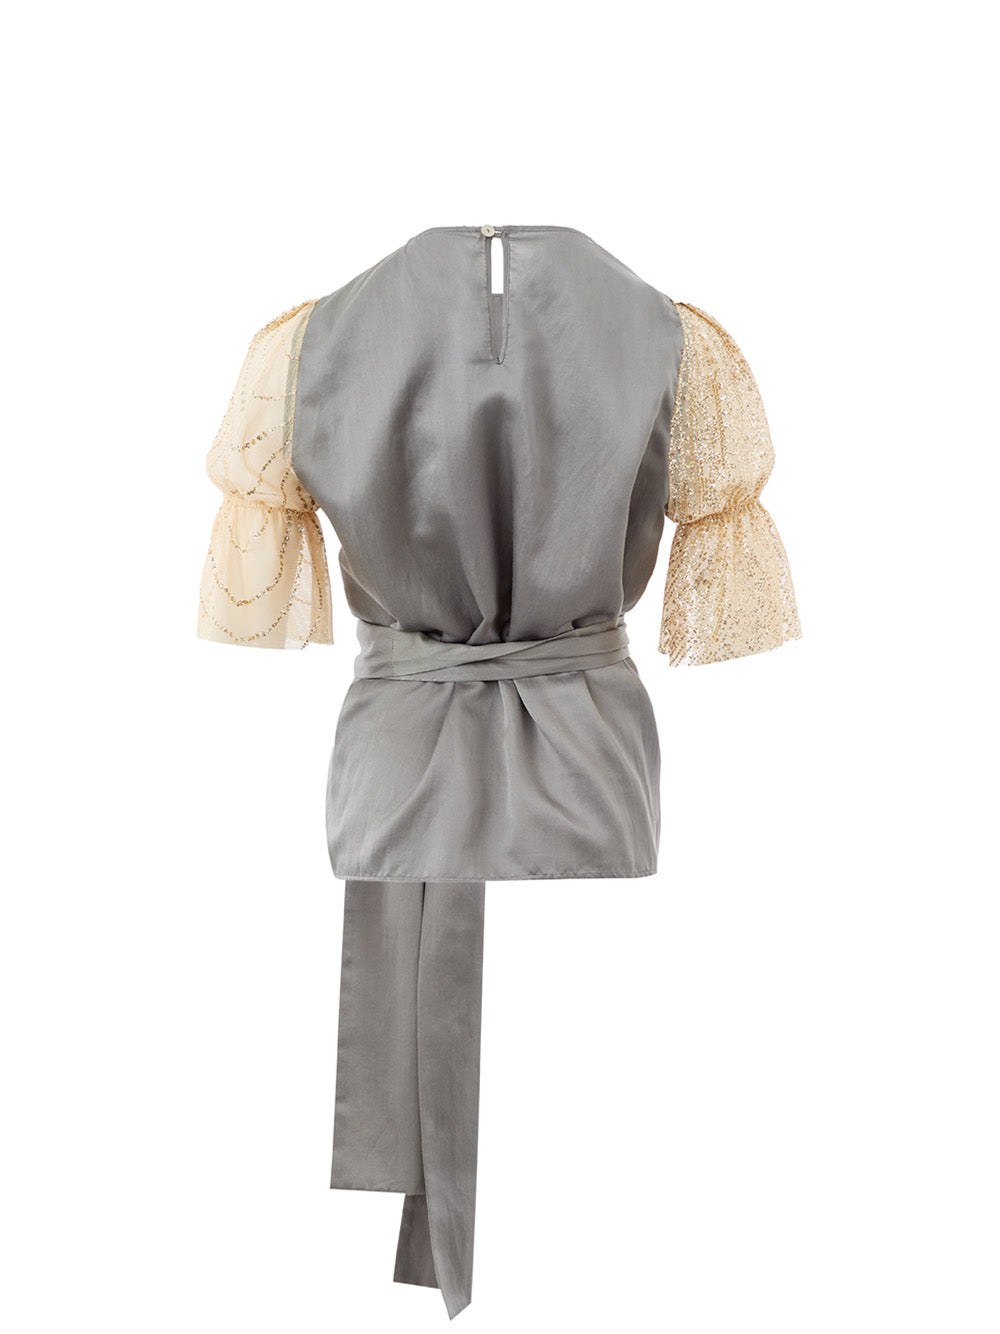 Elegant Silk Ruffled Top for a Sophisticated Look